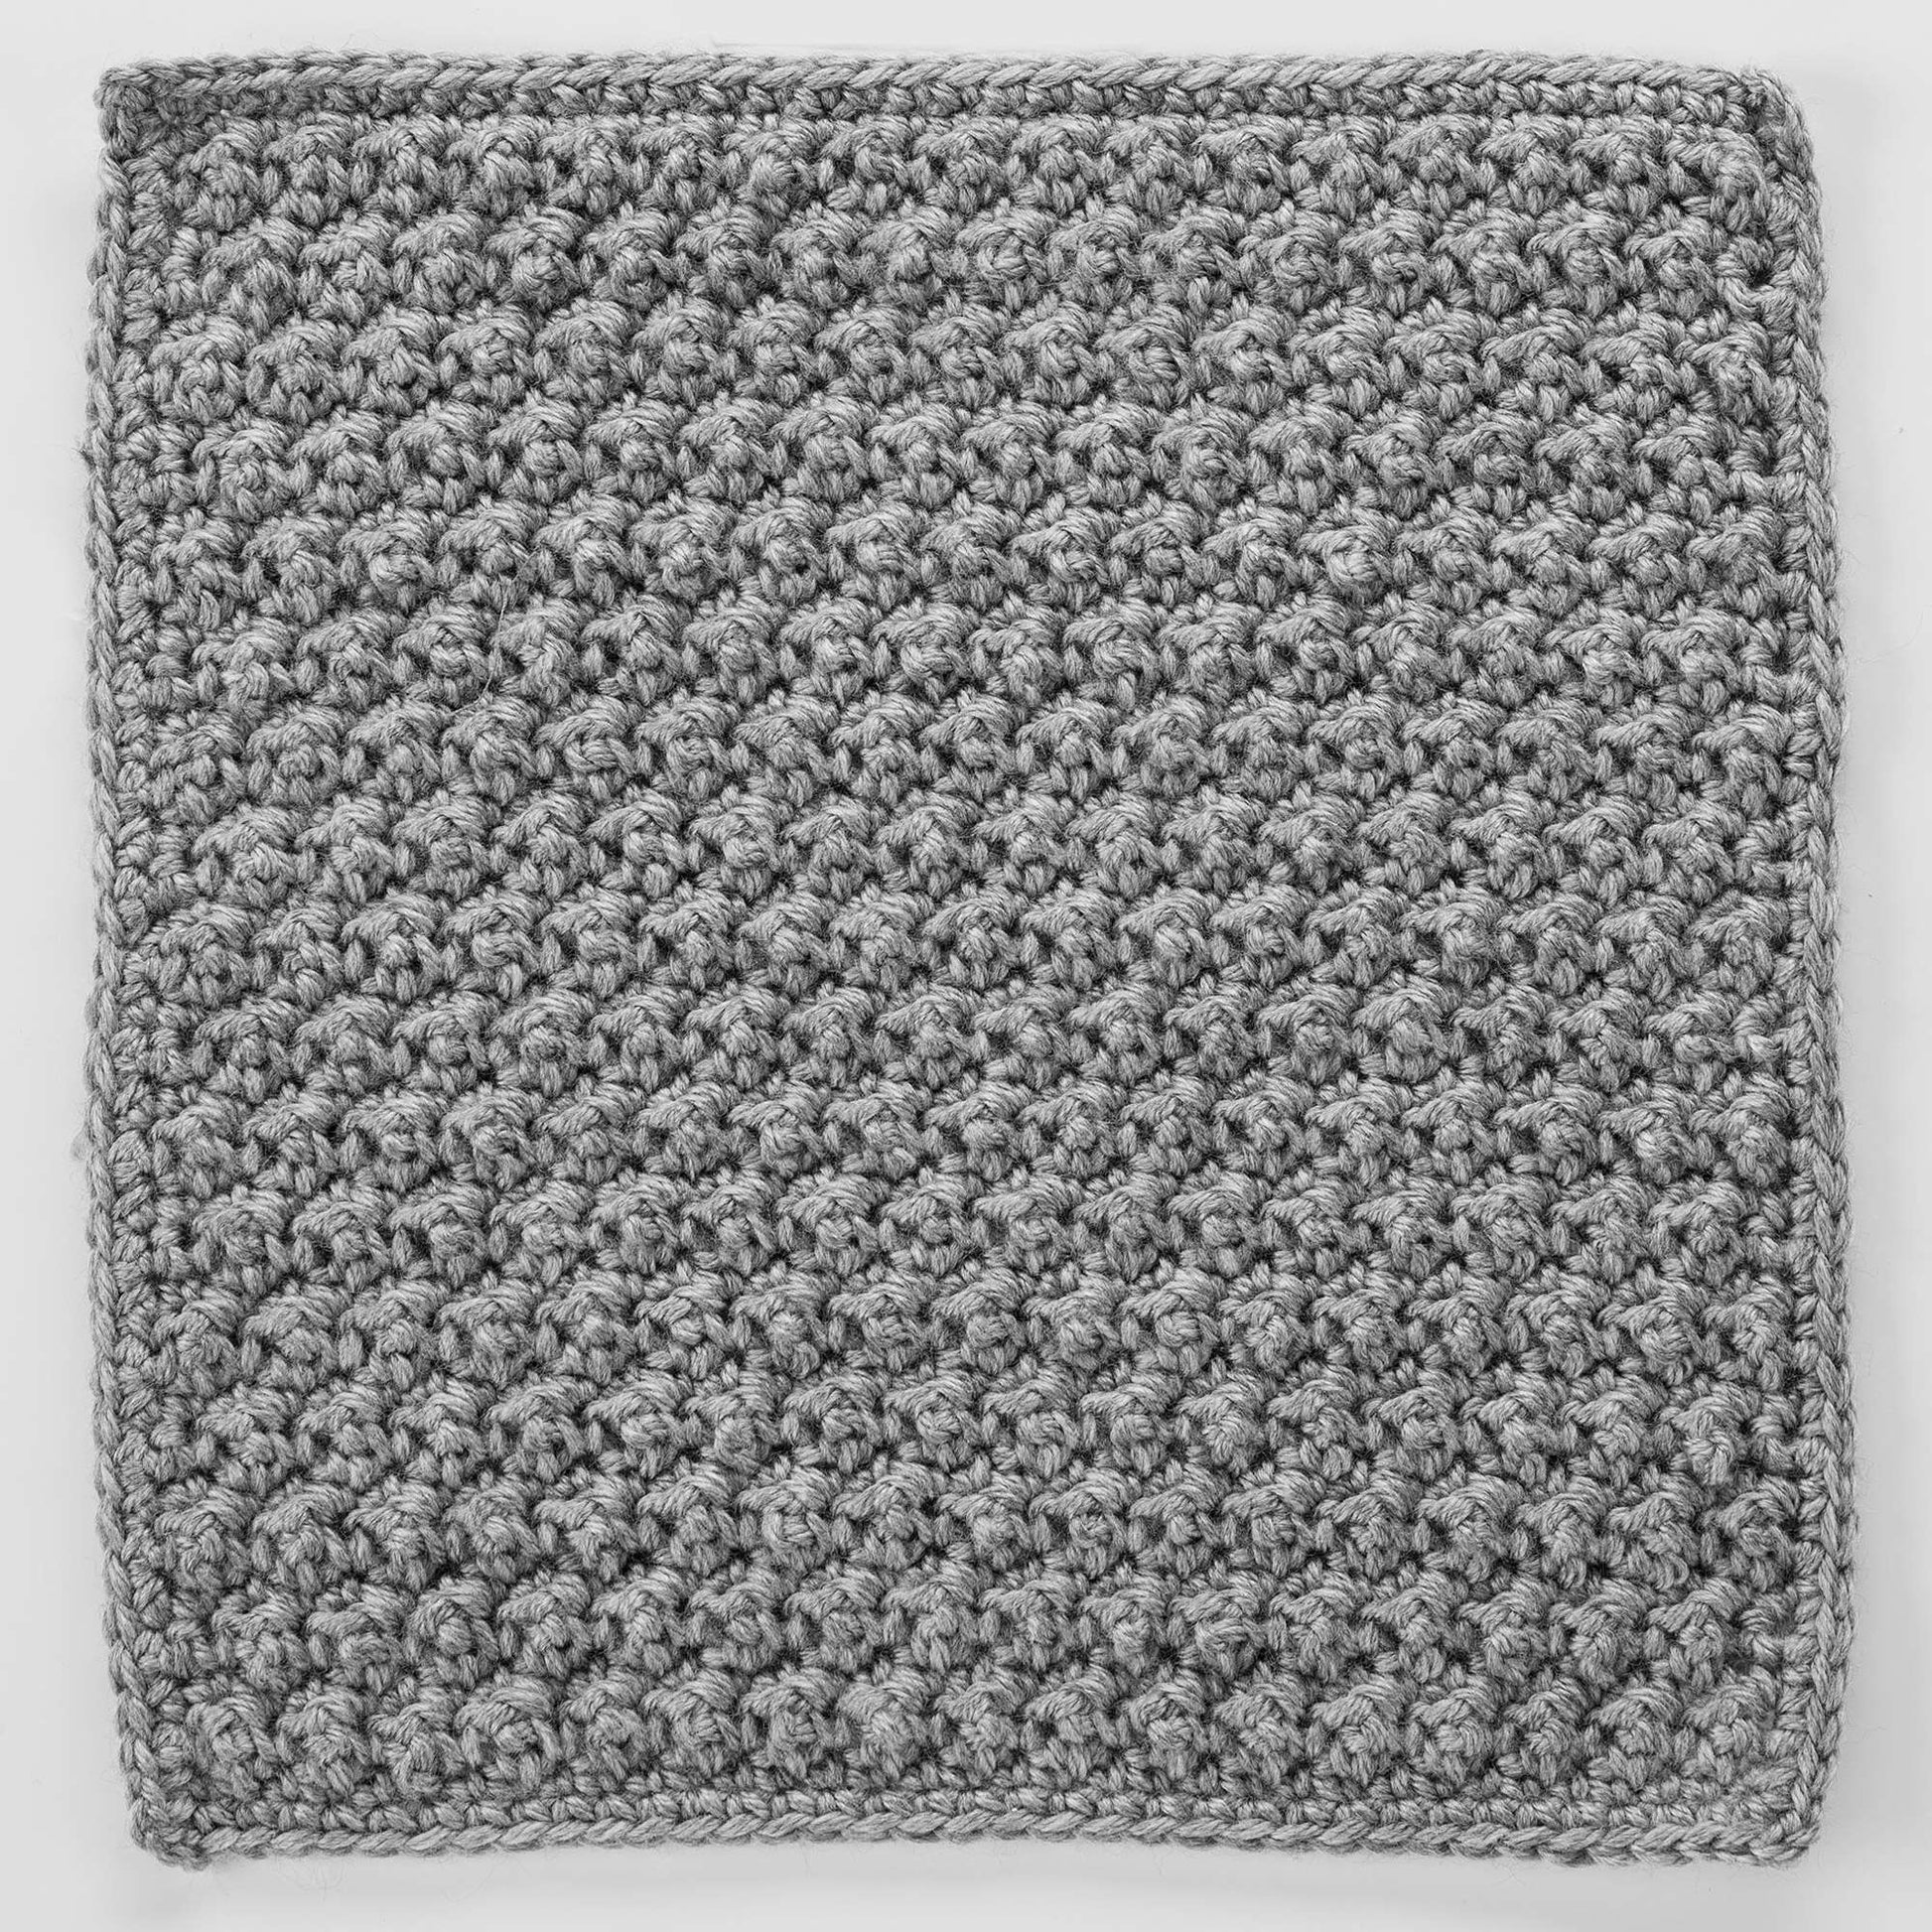 Free Red Heart Raised Crochet Treble Square For Checkerboard Textures Throw Pattern